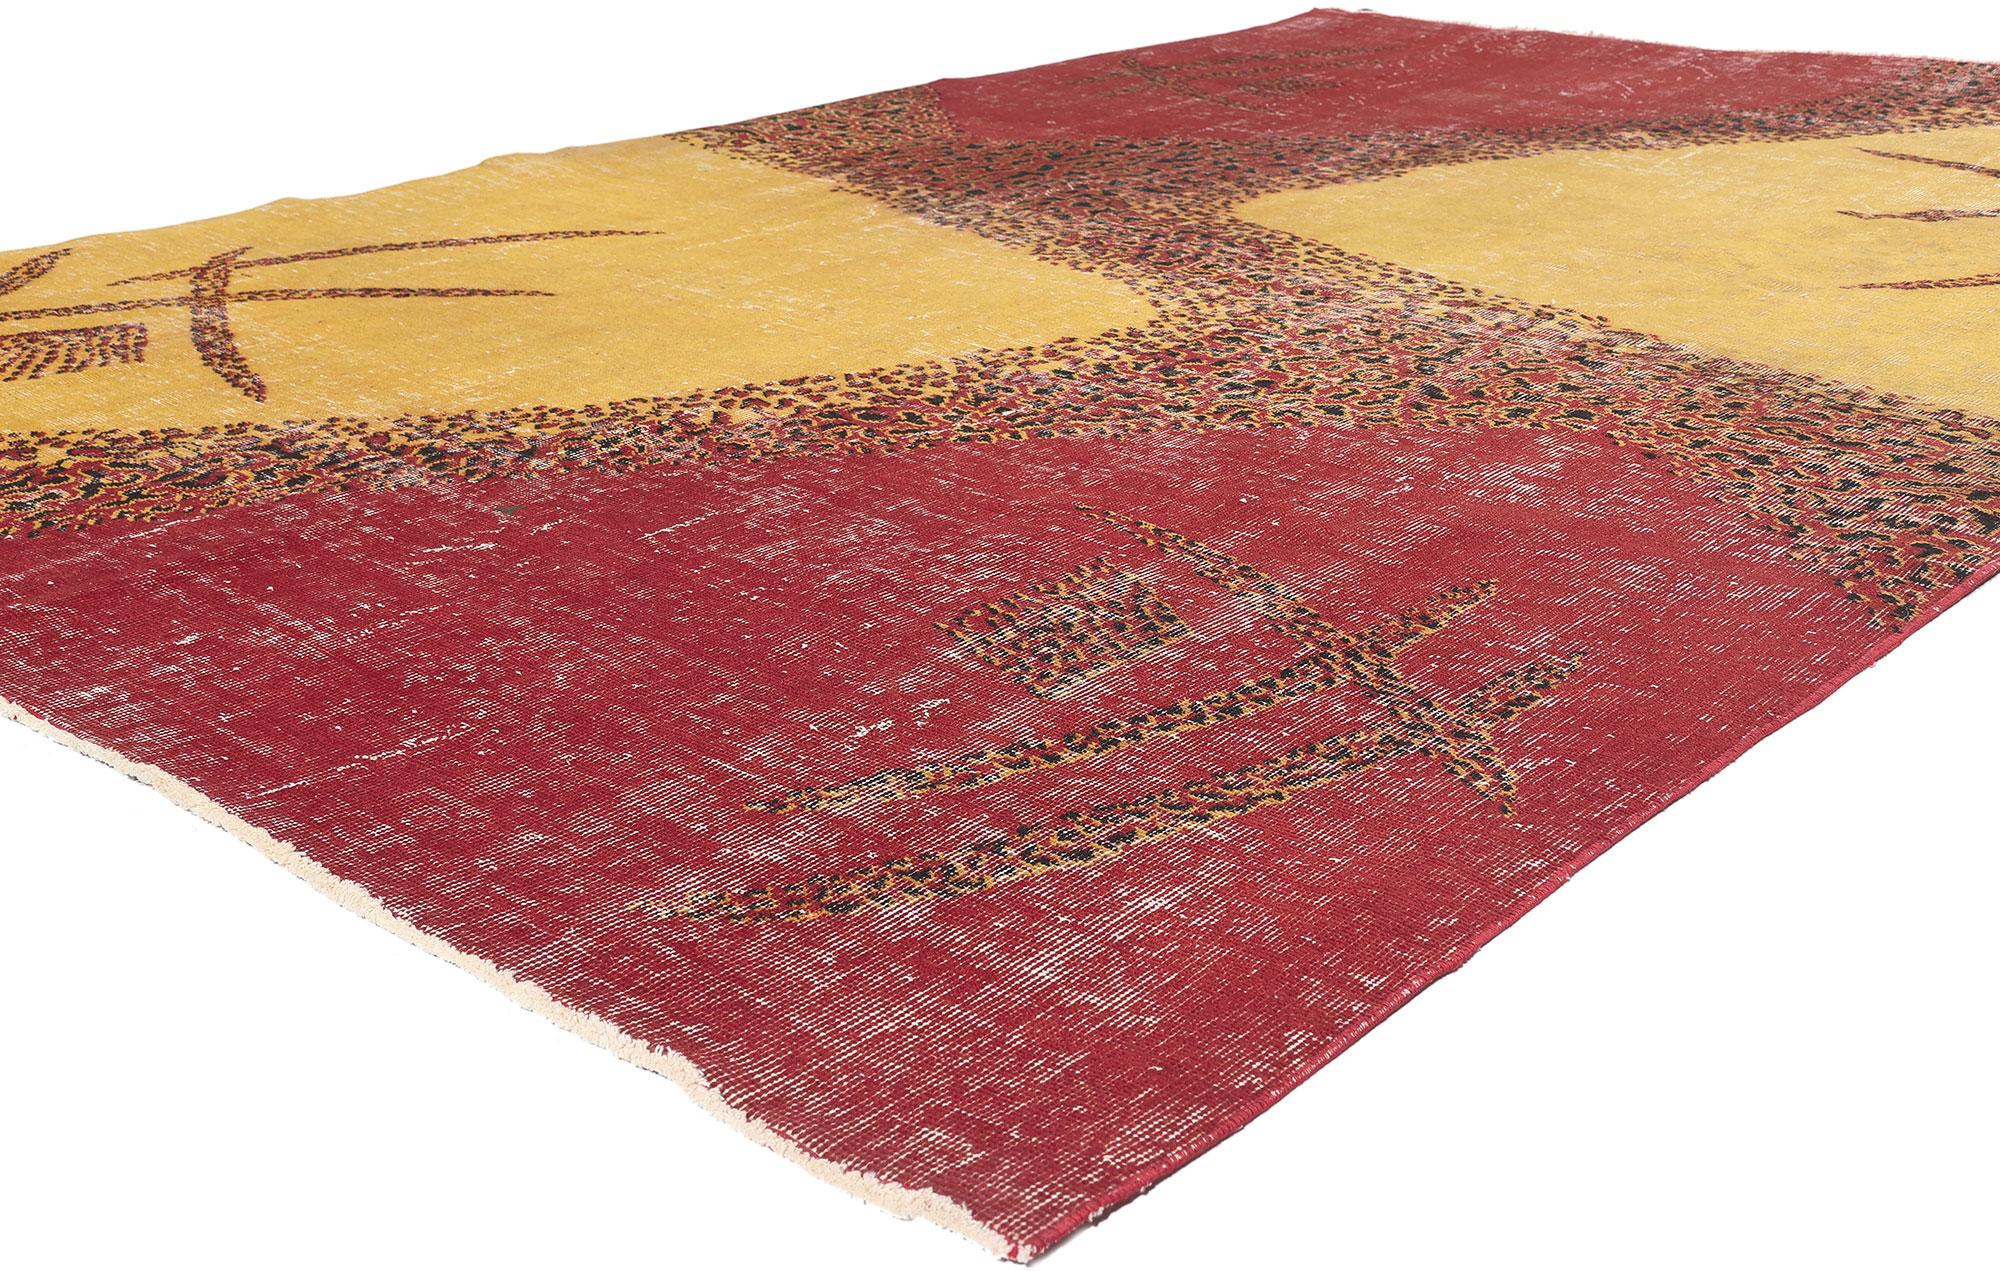 52015 Vintage Turkish Sivas Rug, 06'07 x 10'04.
Abstract Expressionism meets Art Deco style in this Zeki Muren vintage Turkish Sivas rug. The bold geometric design and lively colorway woven into this piece work together creating layers of joy with a